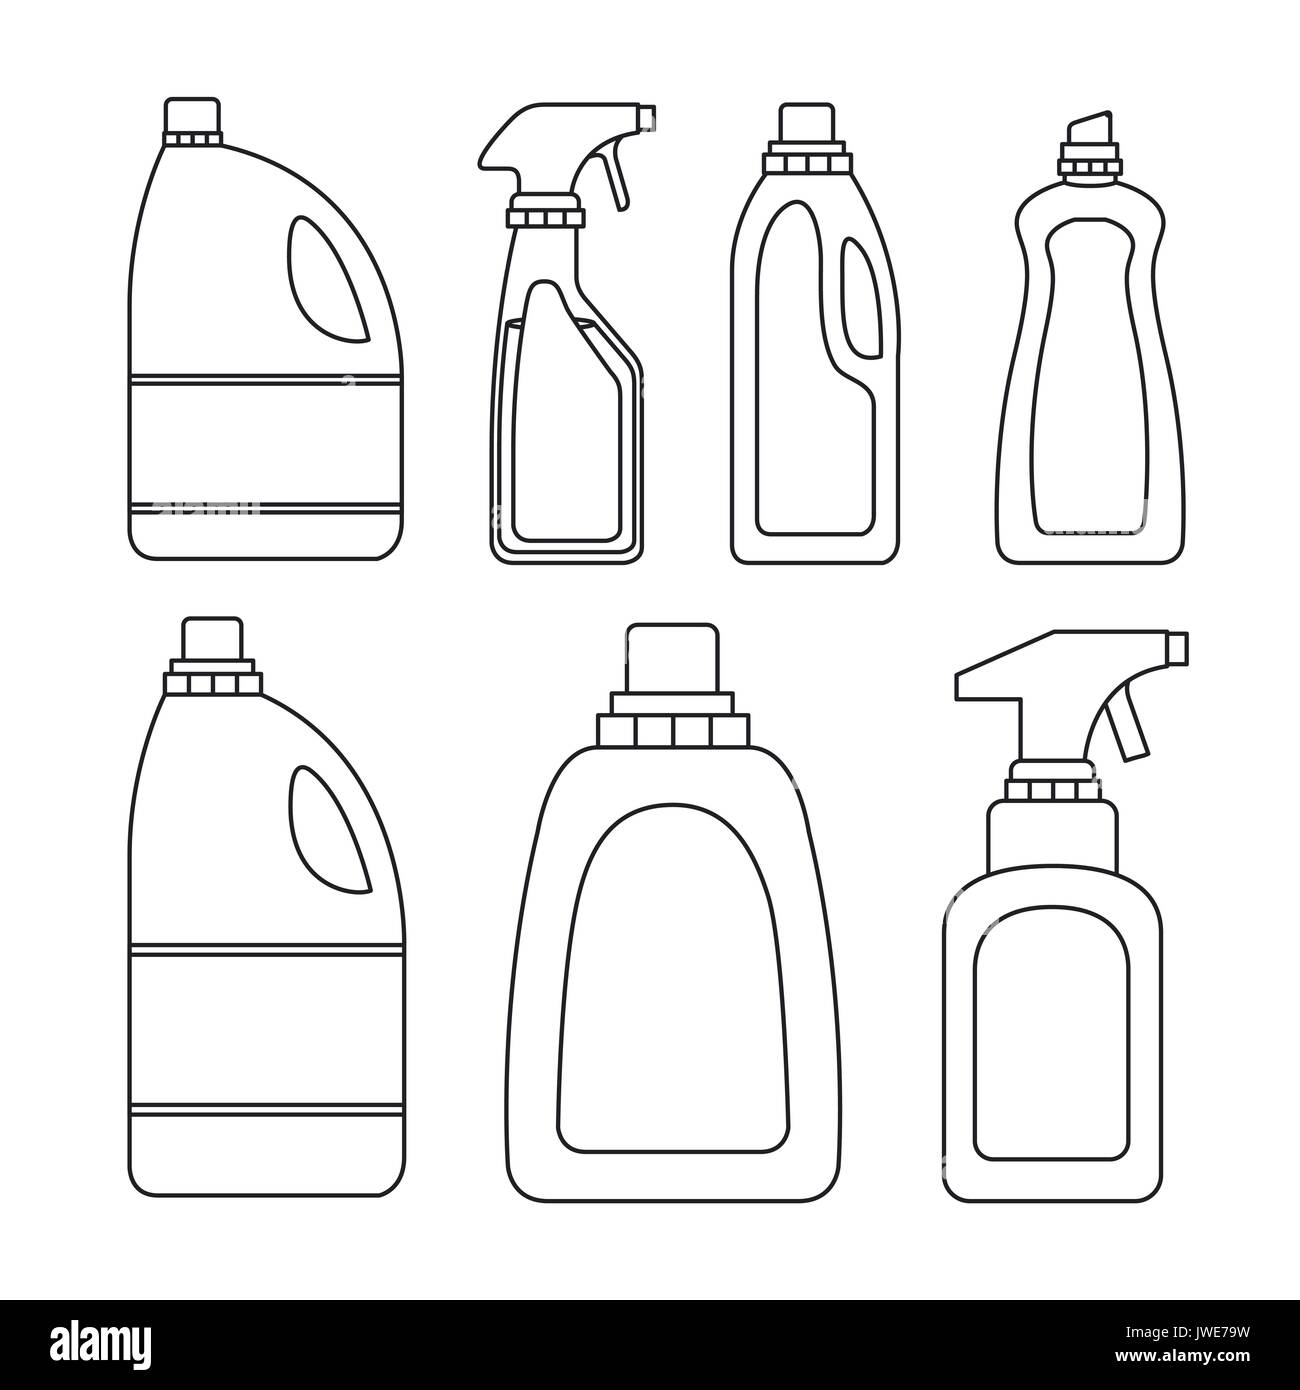 white background of silhouette of set bottles cleaning items laundry Stock Vector